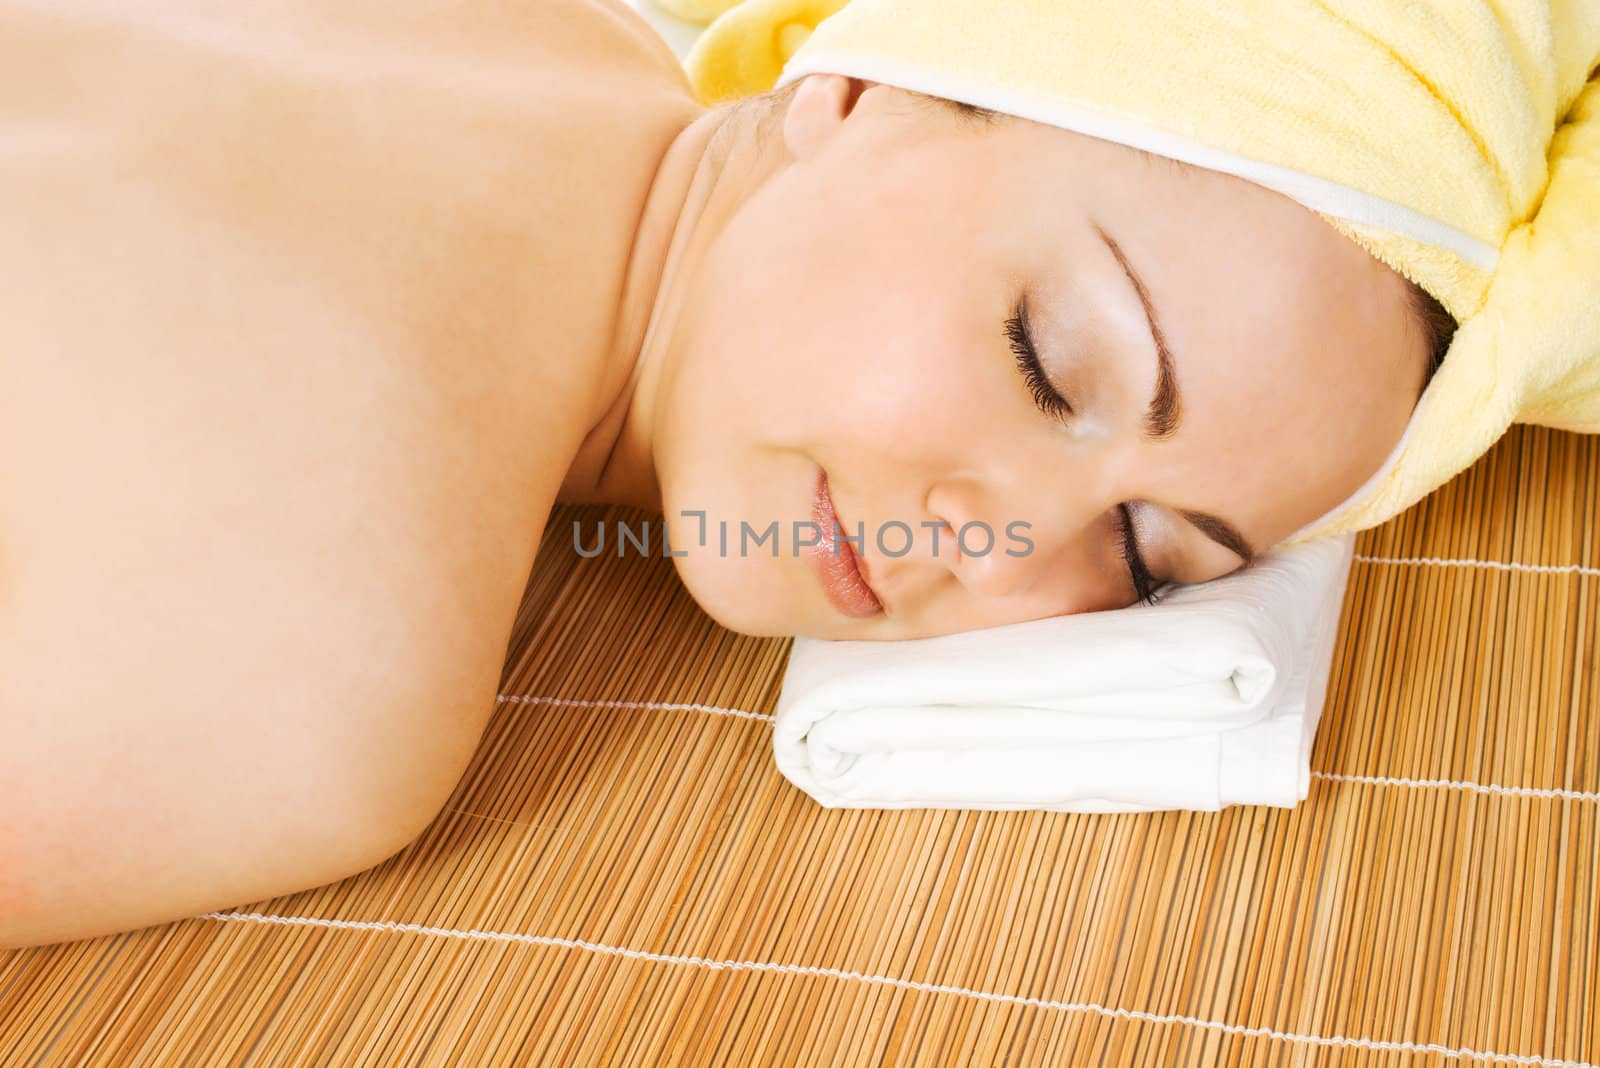 Young woman getting the spa treatment